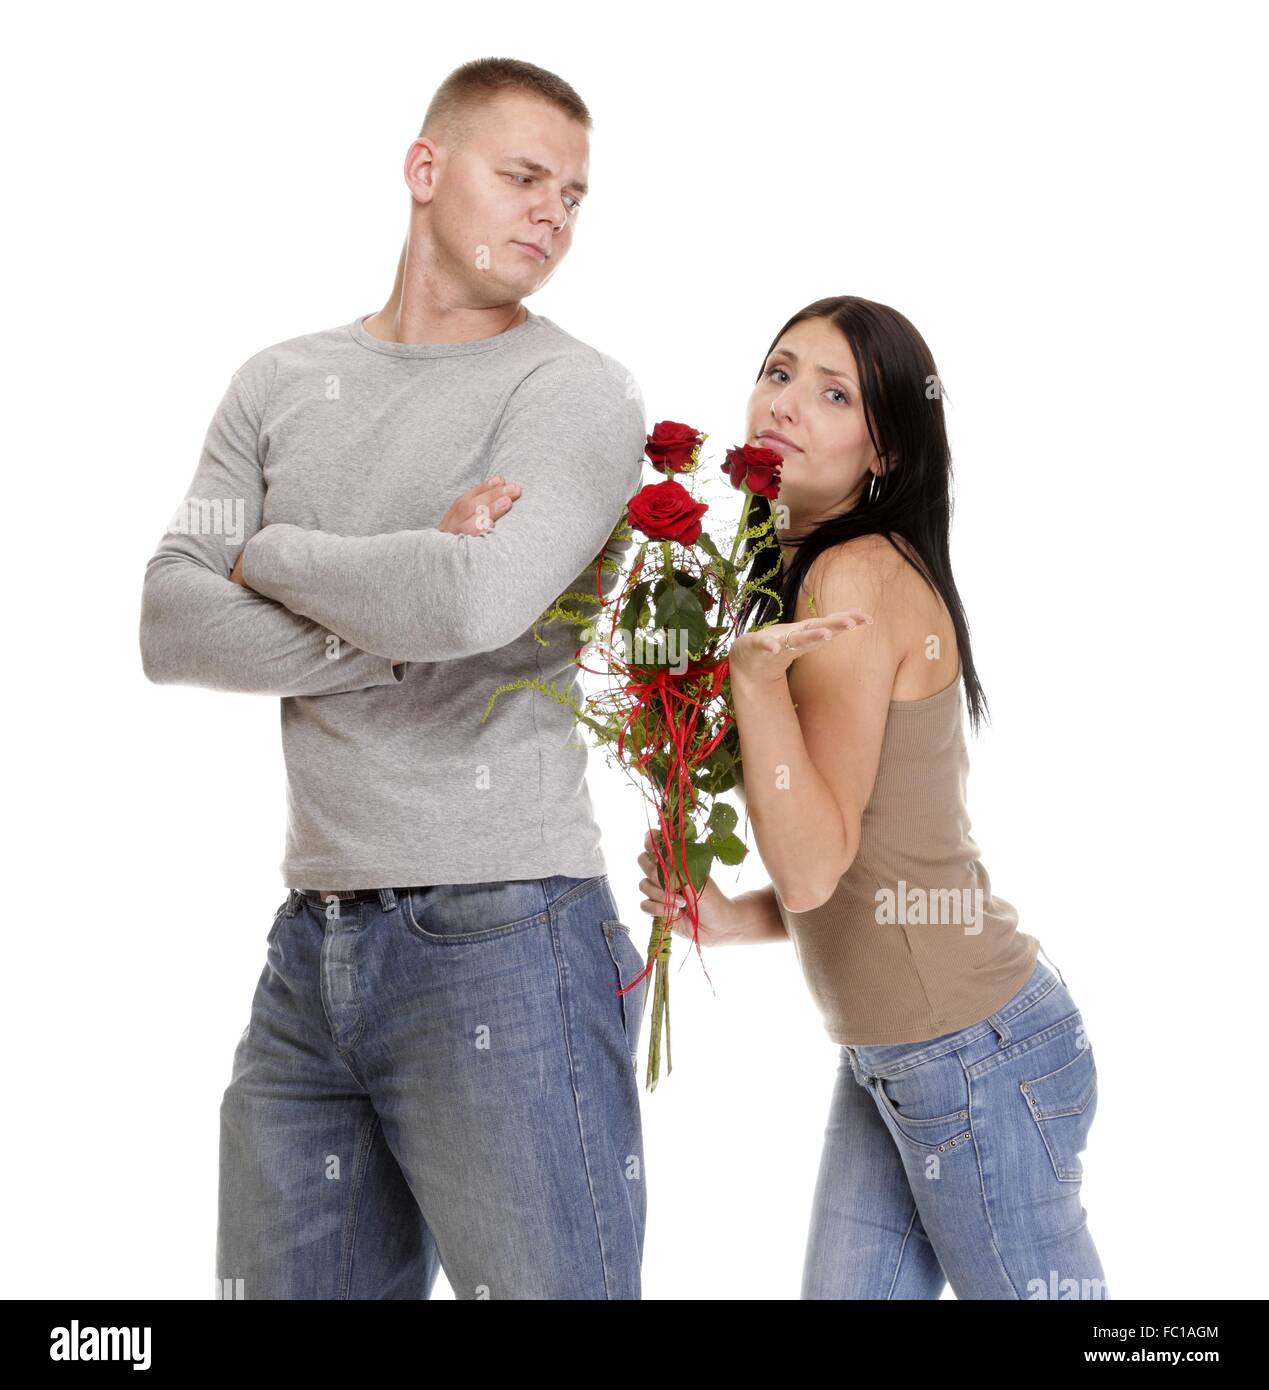 relationship difficulties young couple in conflict isolated Stock Photo